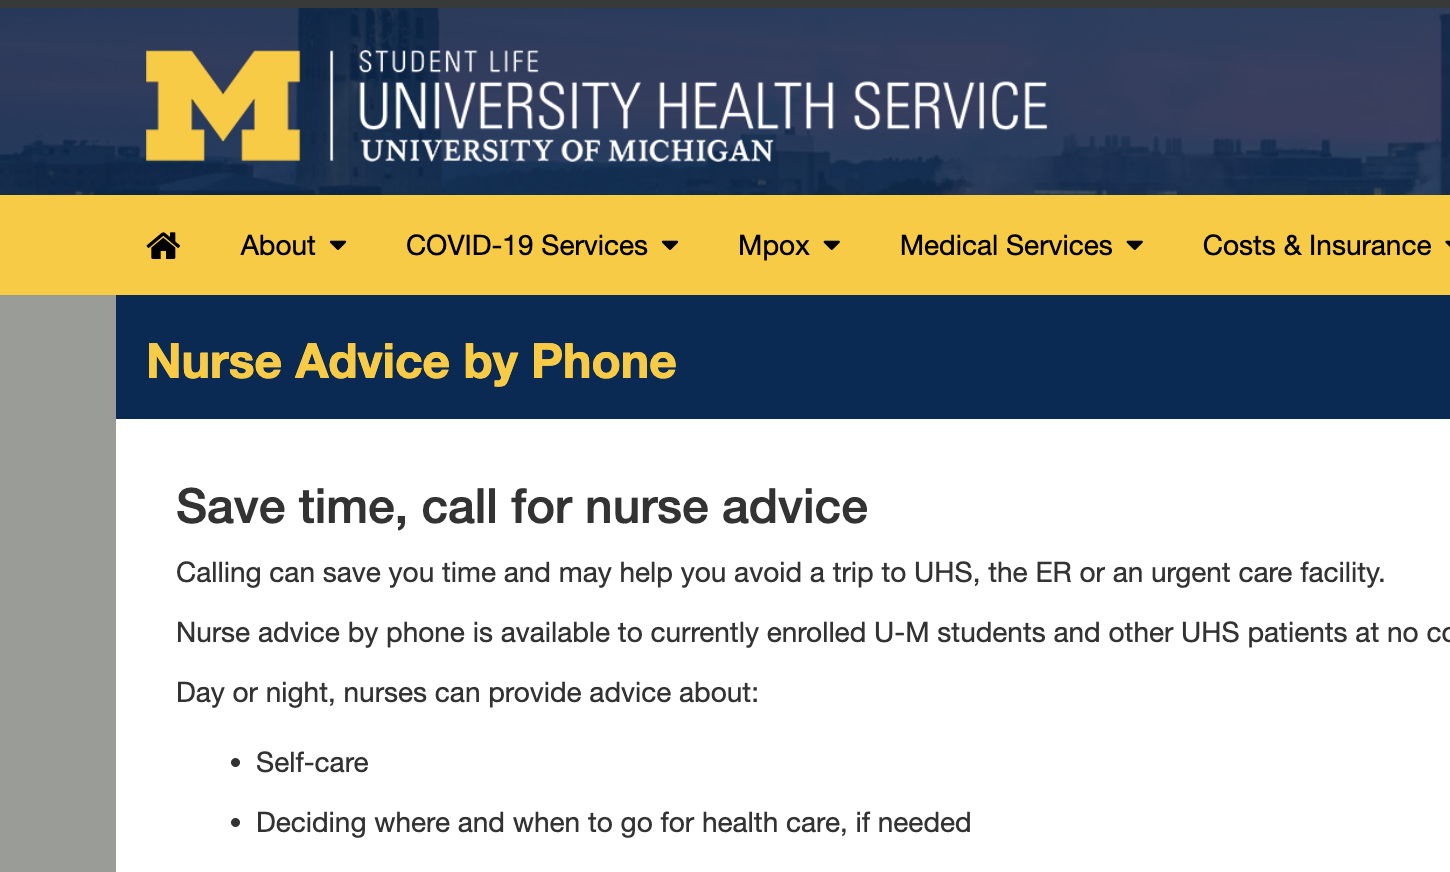 UHS Wants You To Know You Are Caller Number Six In Line And That UHS Also Offers Nurse Advice By Phone Which May Save You A Trip To UHS